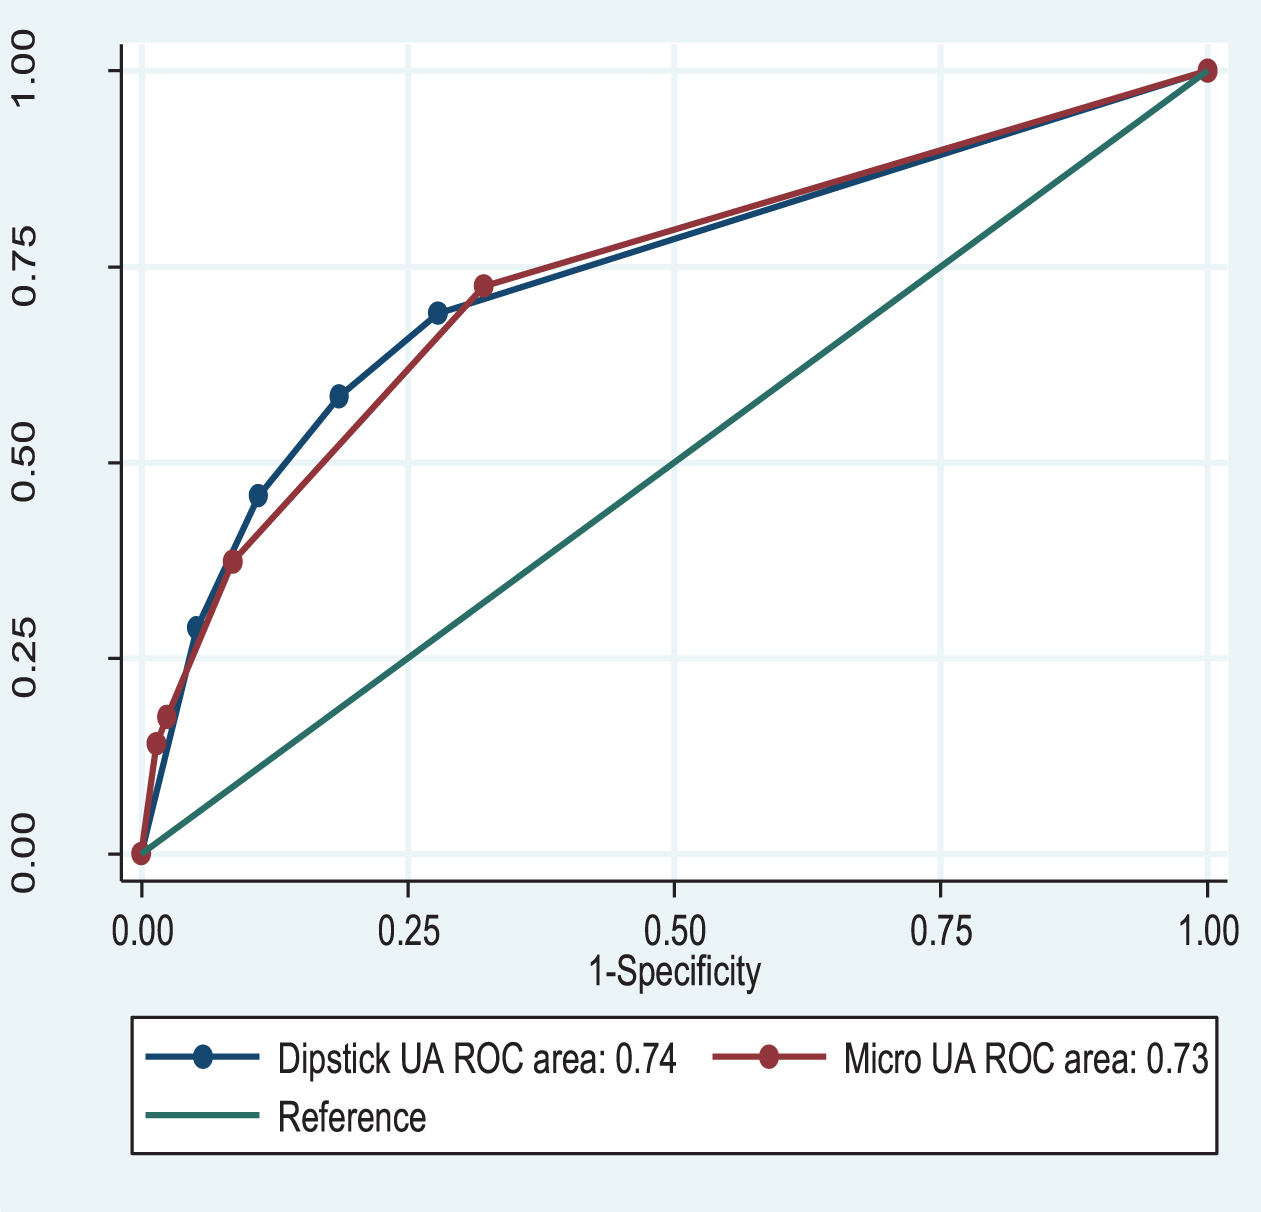 Comparison of ROC curves and AUC for dipstick urinalysis and microscopic urinalysis in the diagnosis of bladder cancer.